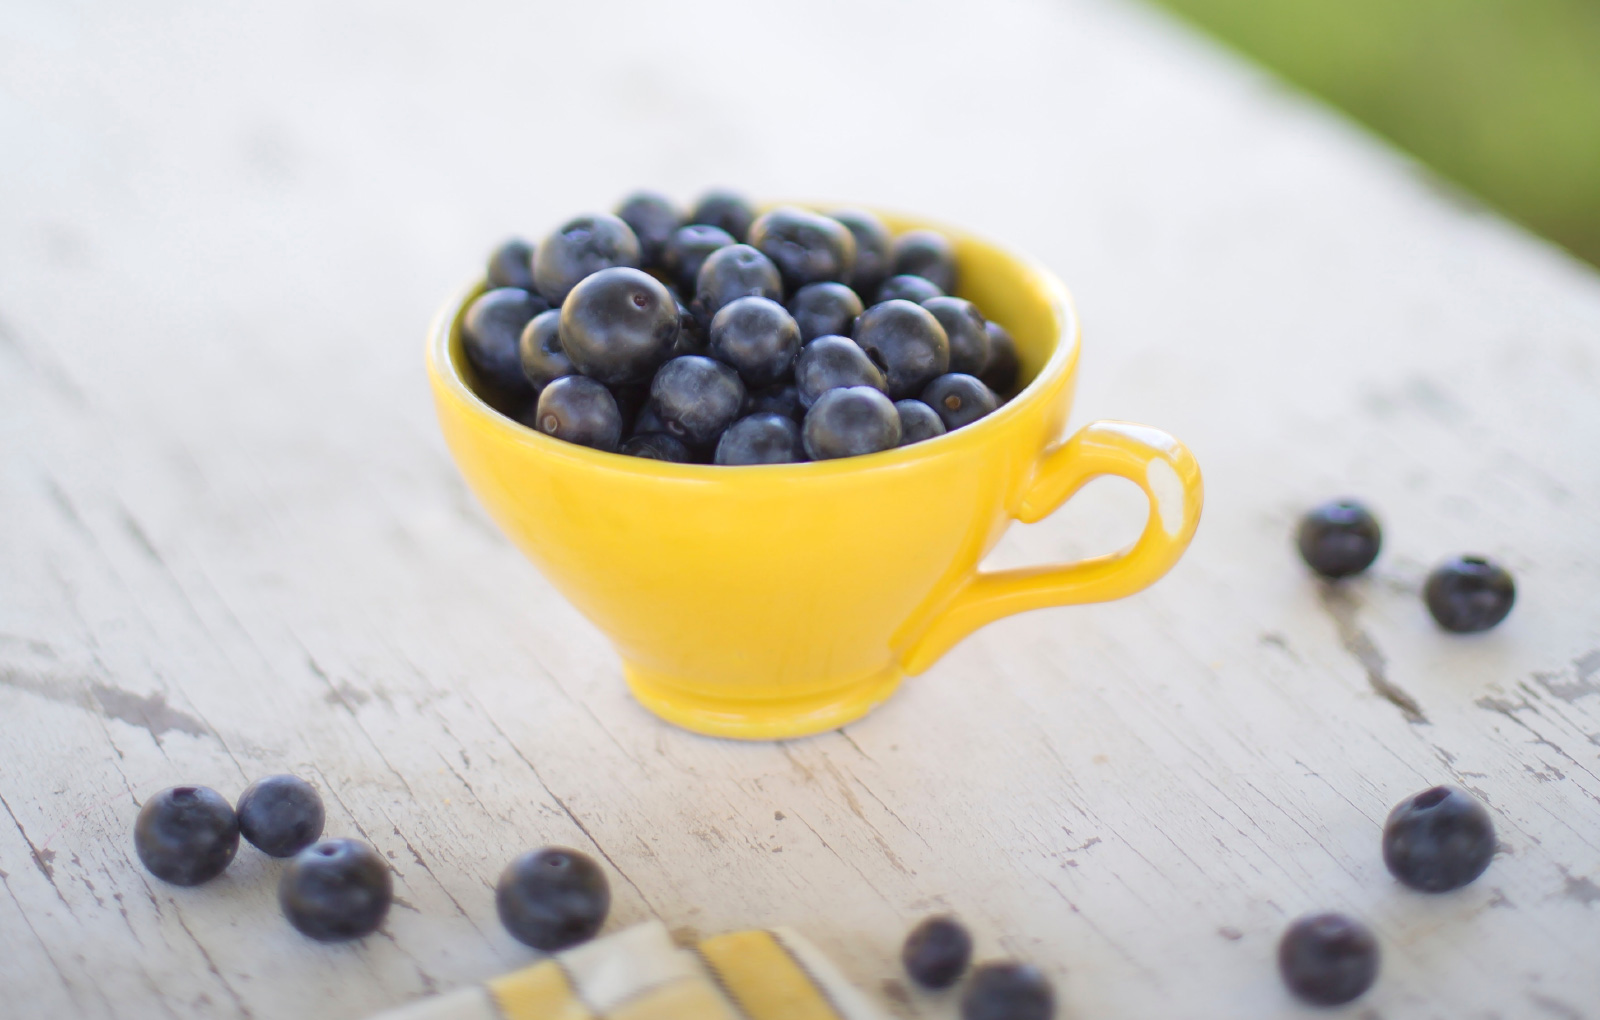 Places to Pick Your Own Blueberries